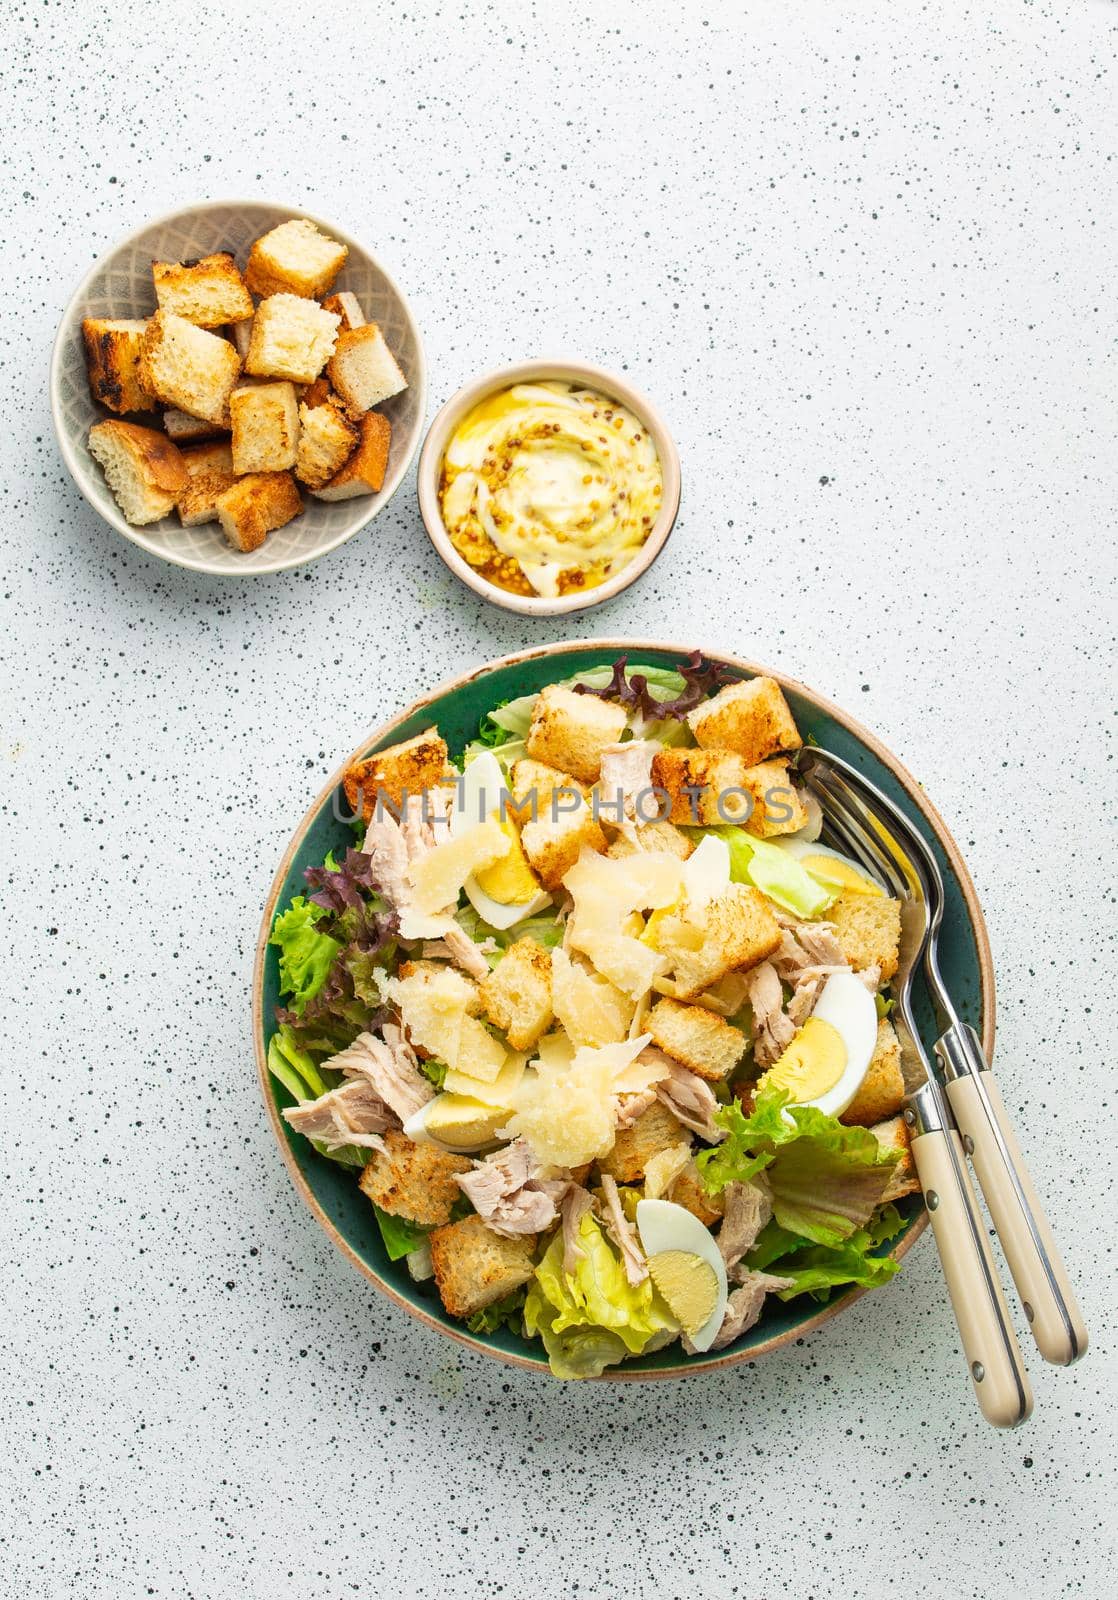 Fresh Caesar salad with lettuce salad, chicken breast, boiled eggs and croutons in ceramic bowl with dressing on the side on white table. Top view, healthy salad great for lunch, snack or appetizer